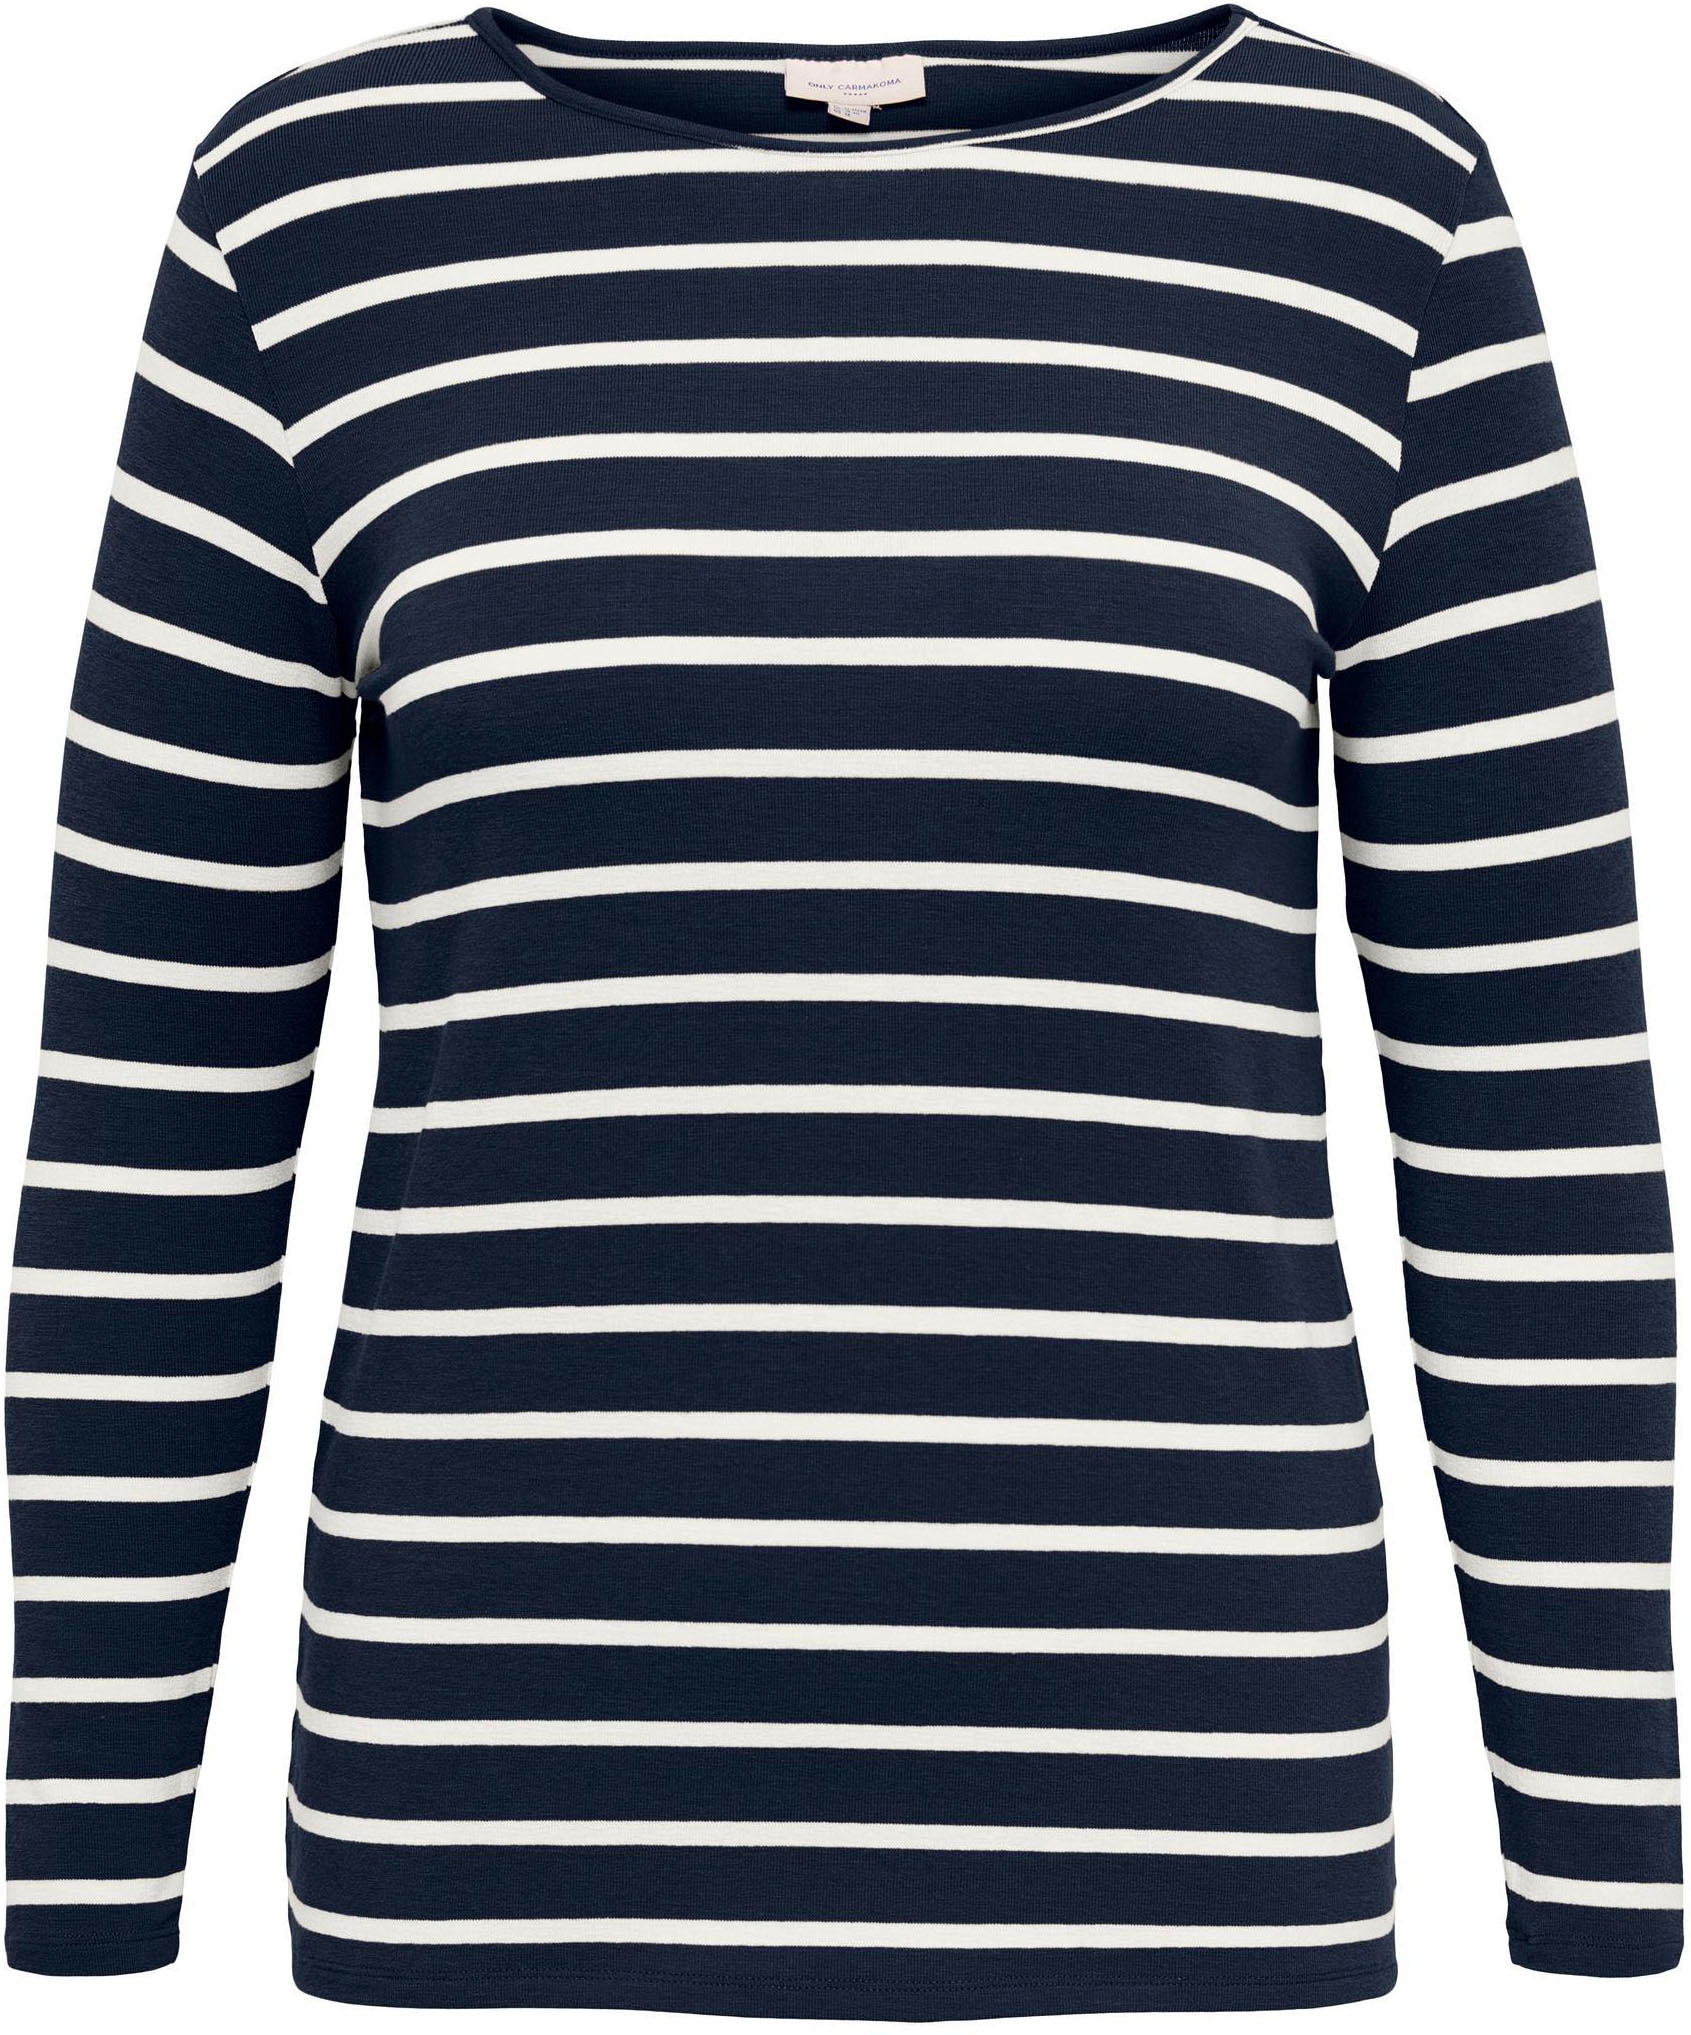 ONLY CARMAKOMA OTTO »CARELKE bei JRS« TOP Langarmshirt L/S online